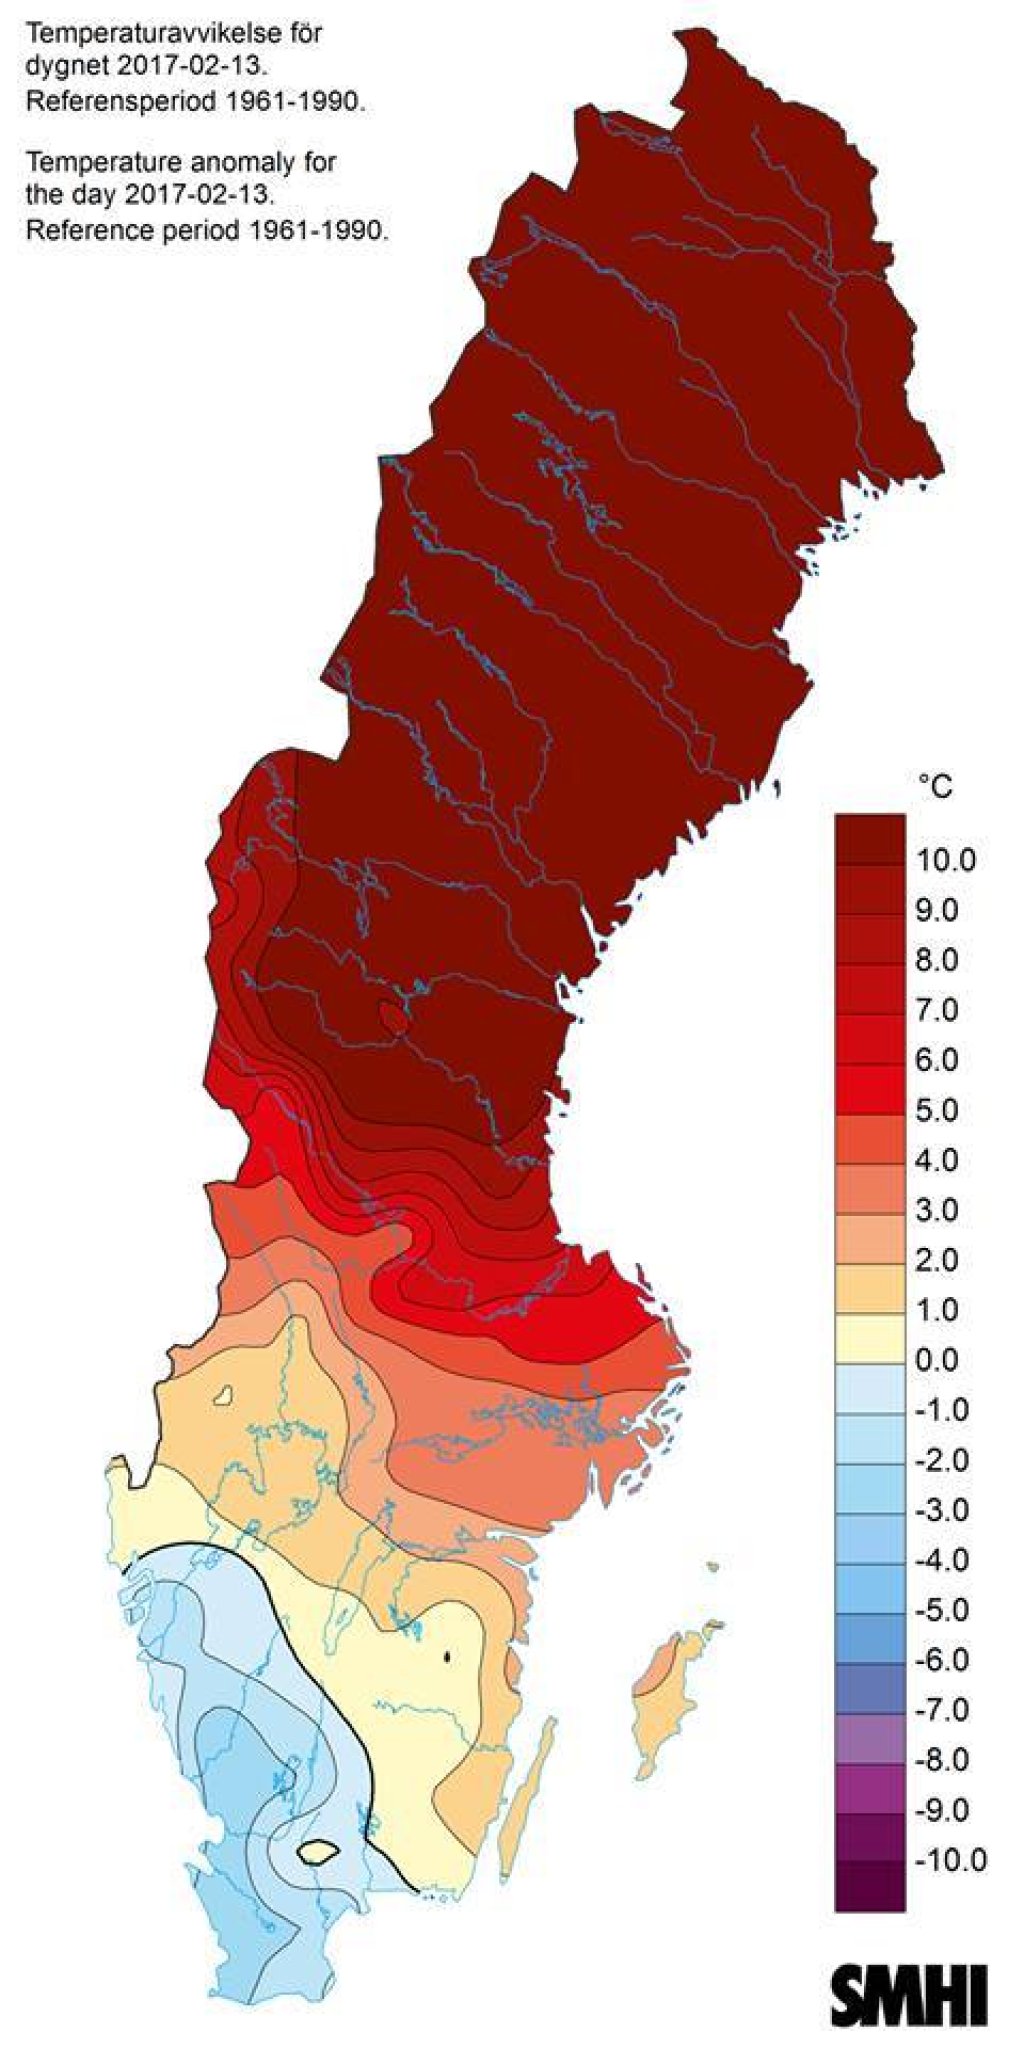 Temperature anomaly Sweden from 13.2.2017, based on the period 1961-1990.